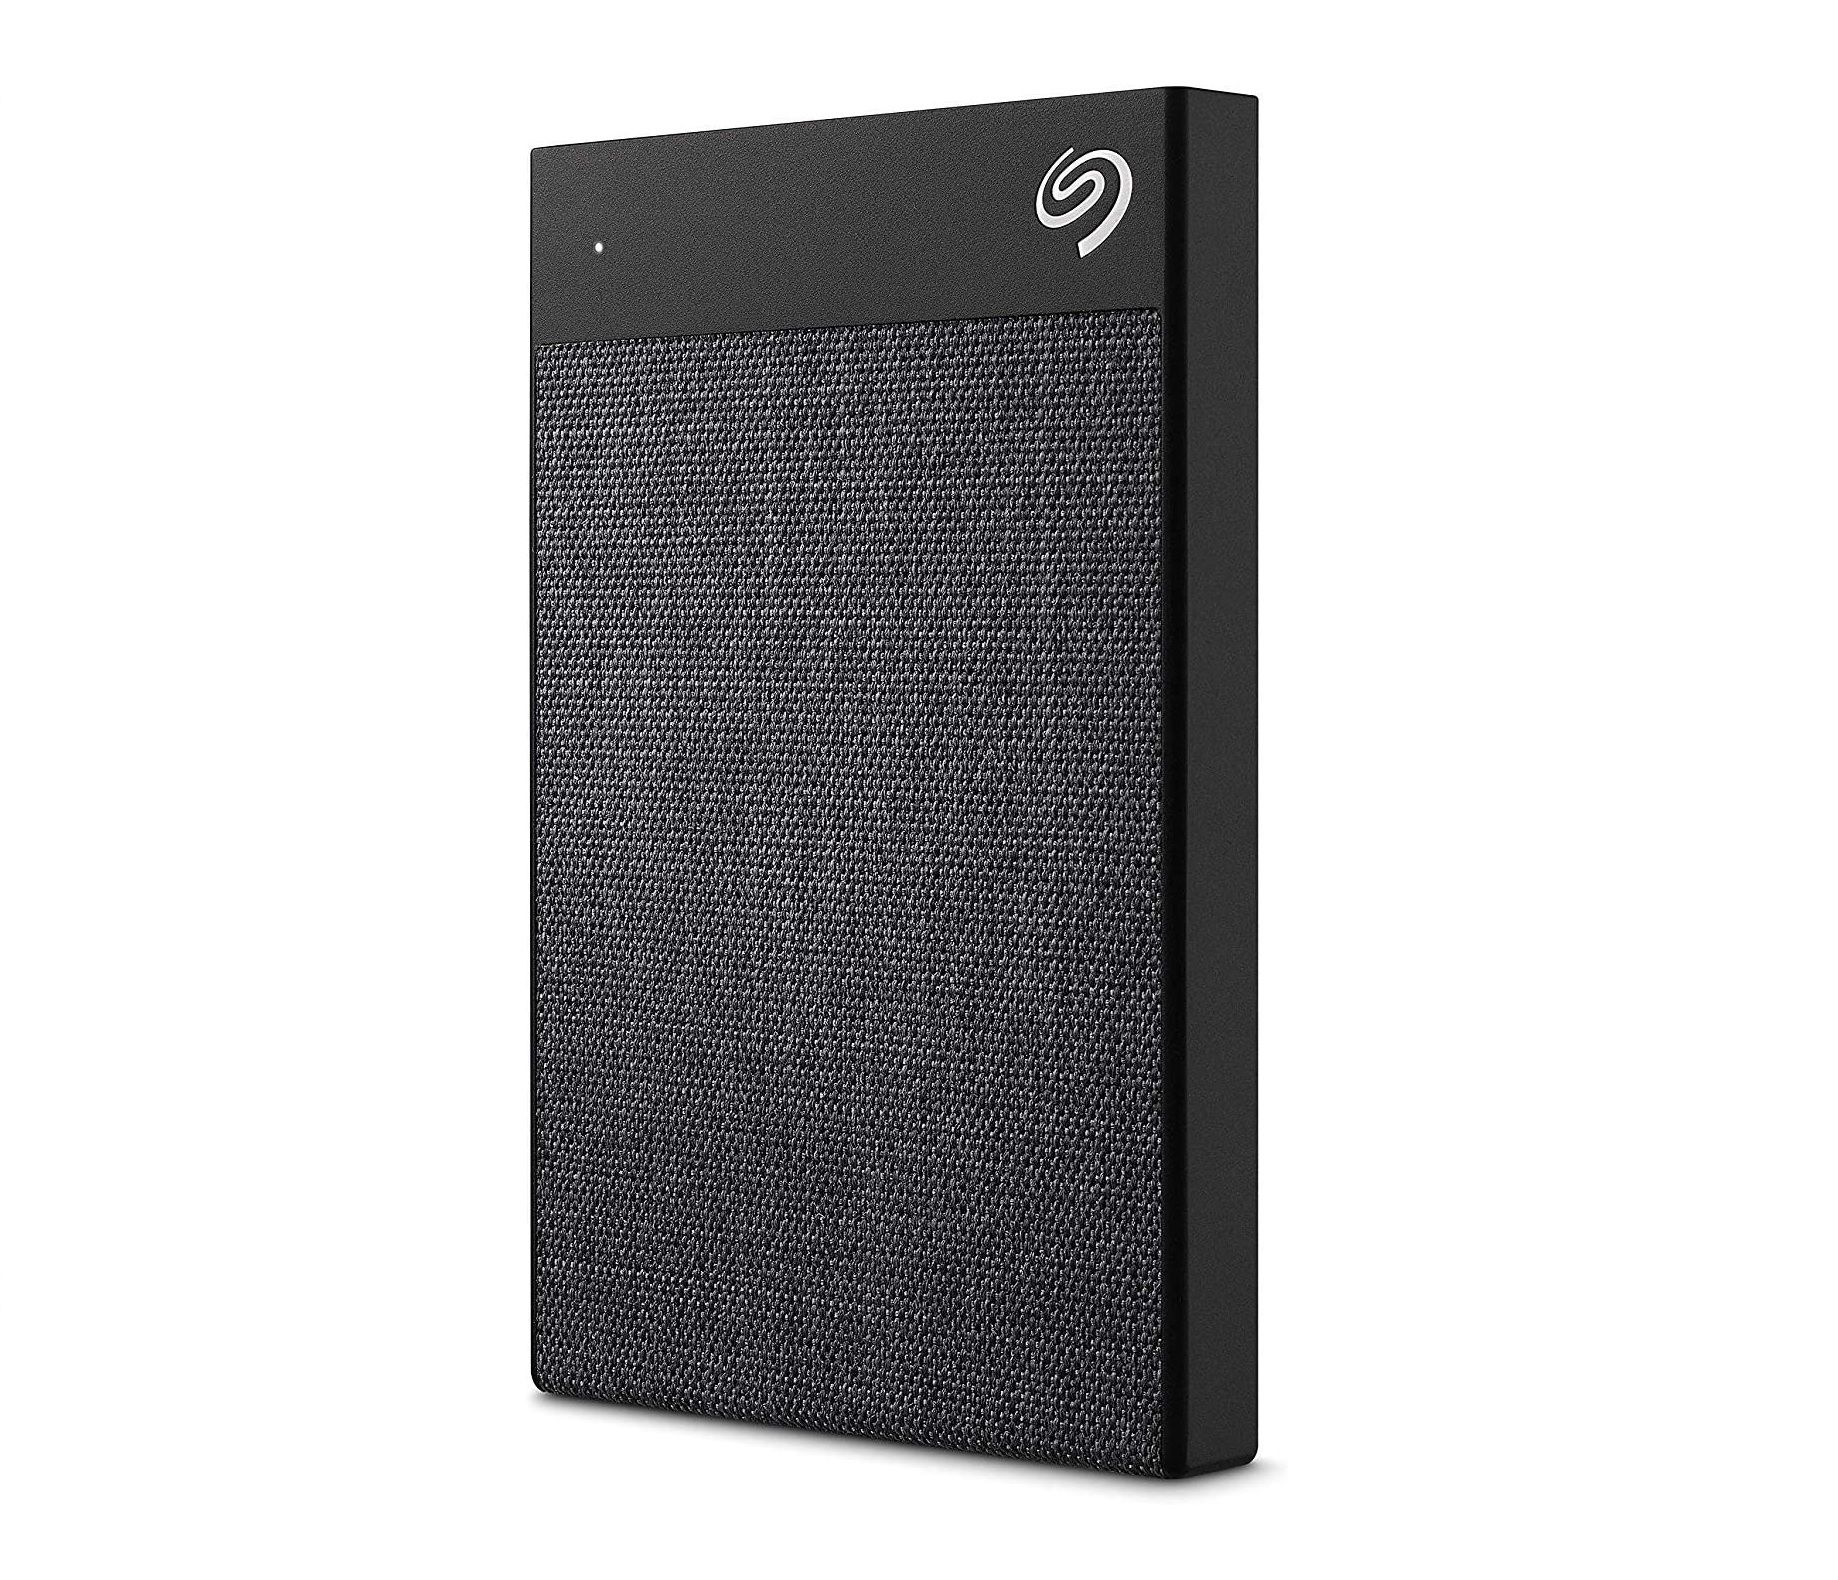 a black-colored seagate ultra touch external hdd